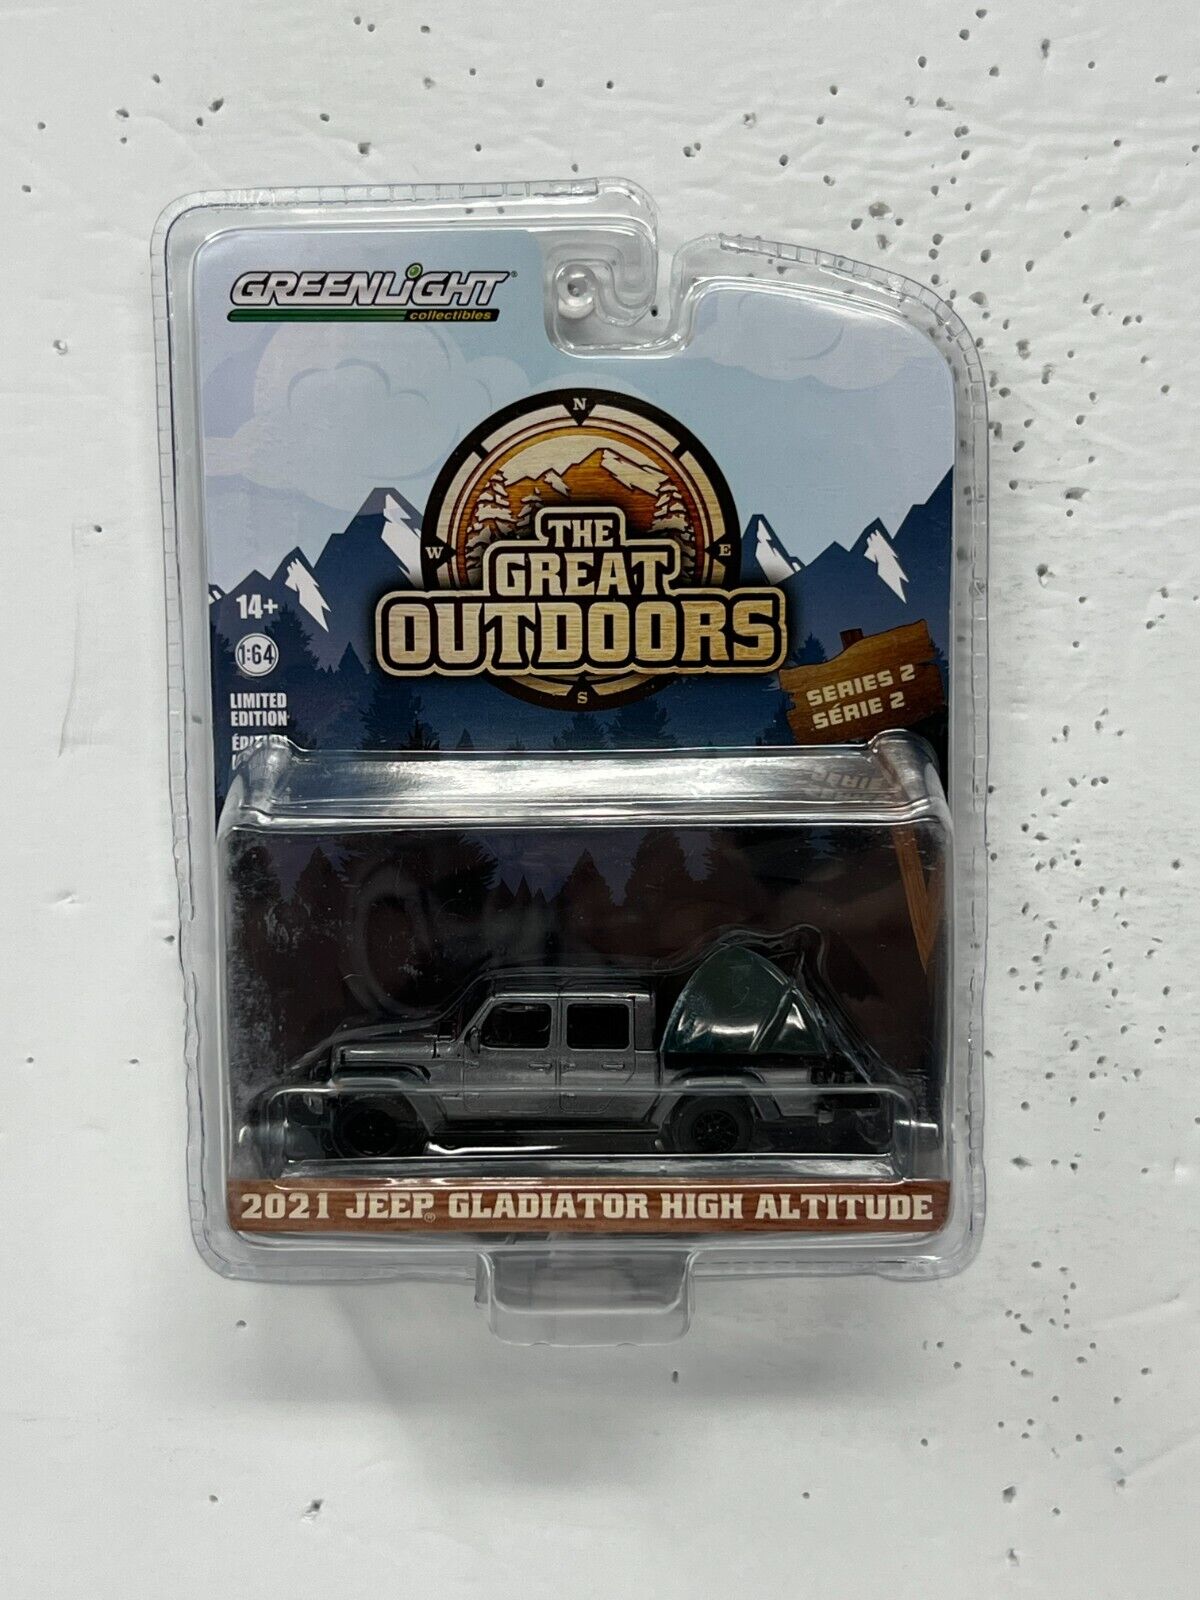 Greenlight The Great Outdoors 2021 Jeep Gladiator High Altitude 1:64 Diecast